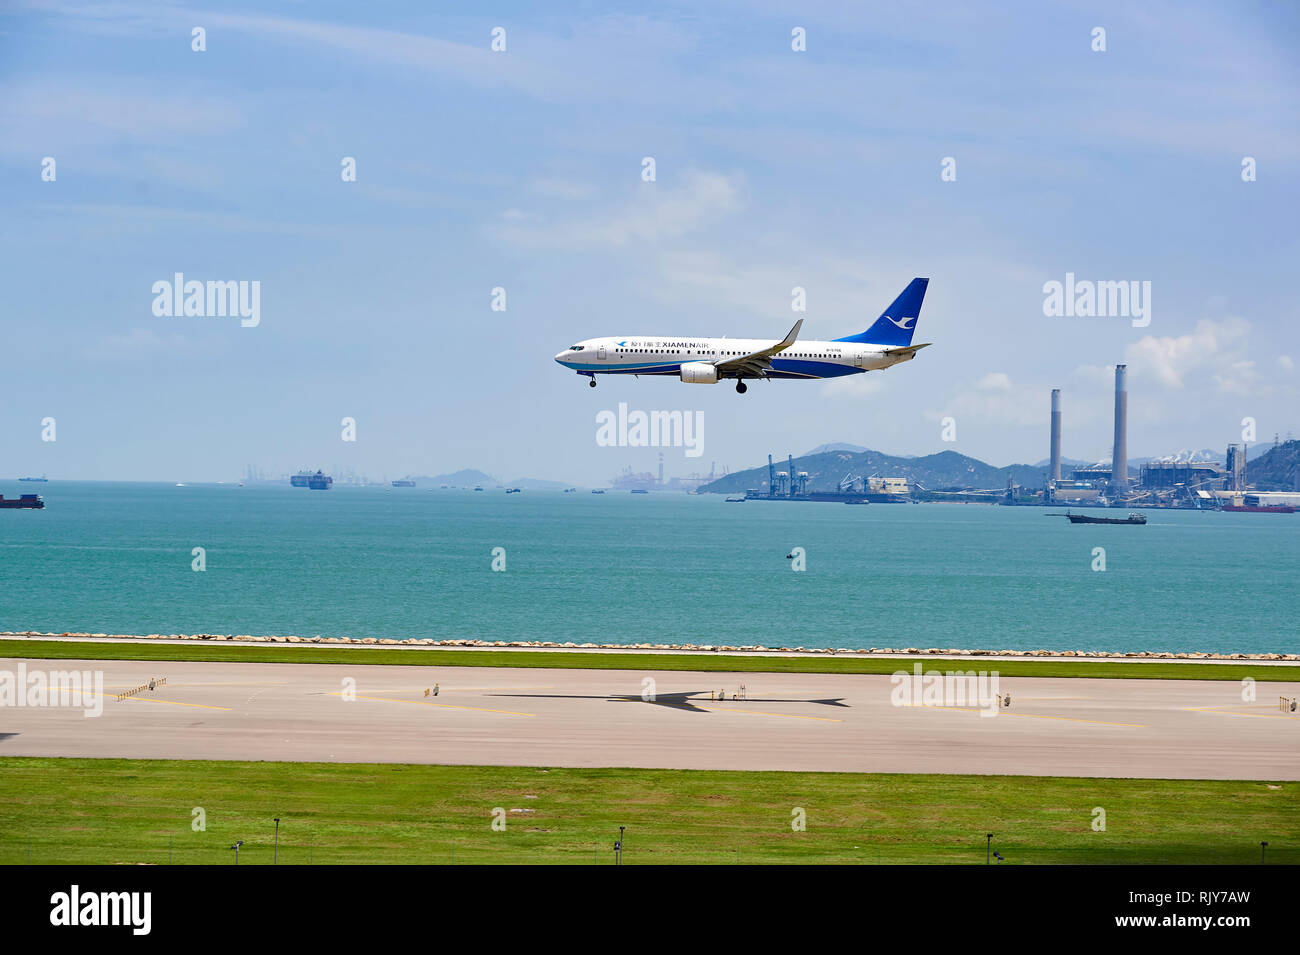 HONG KONG - JUNE 04, 2015: XiamenAir aircraft landing at Hong Kong airport. XiamenAir (formerly Xiamen Airlines) is the first privately owned airline  Stock Photo